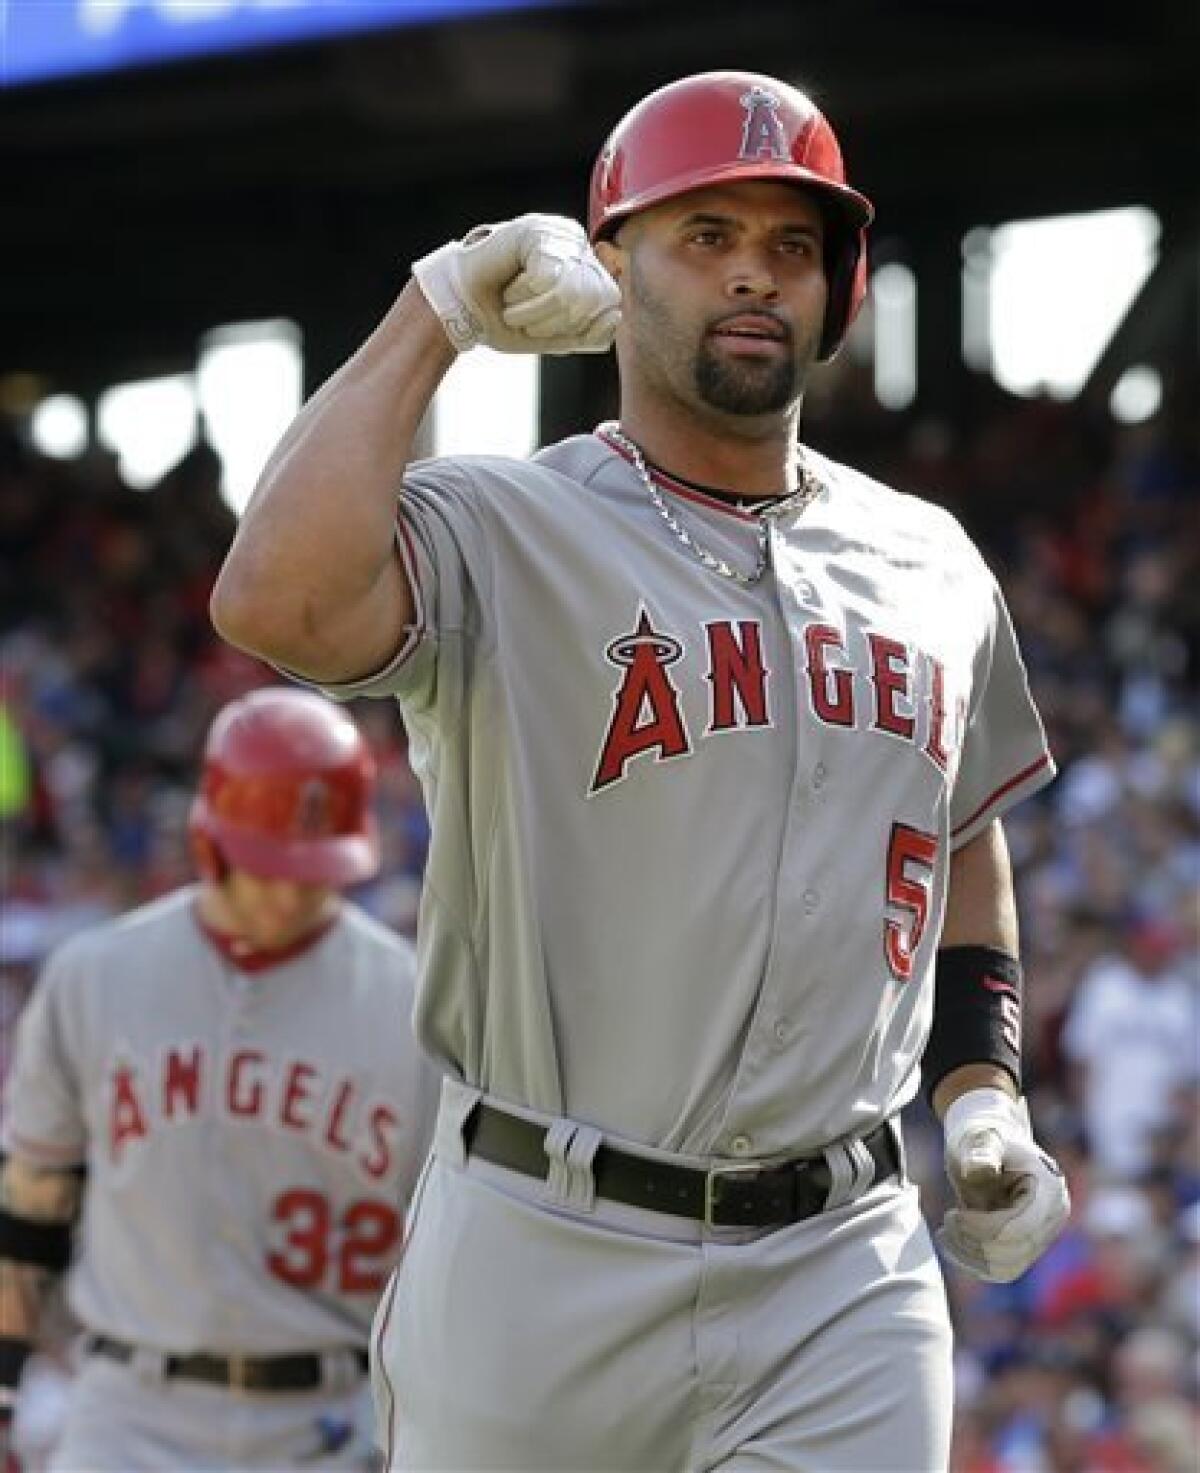 I know many of us had issues with Pujols in the past, but I'm